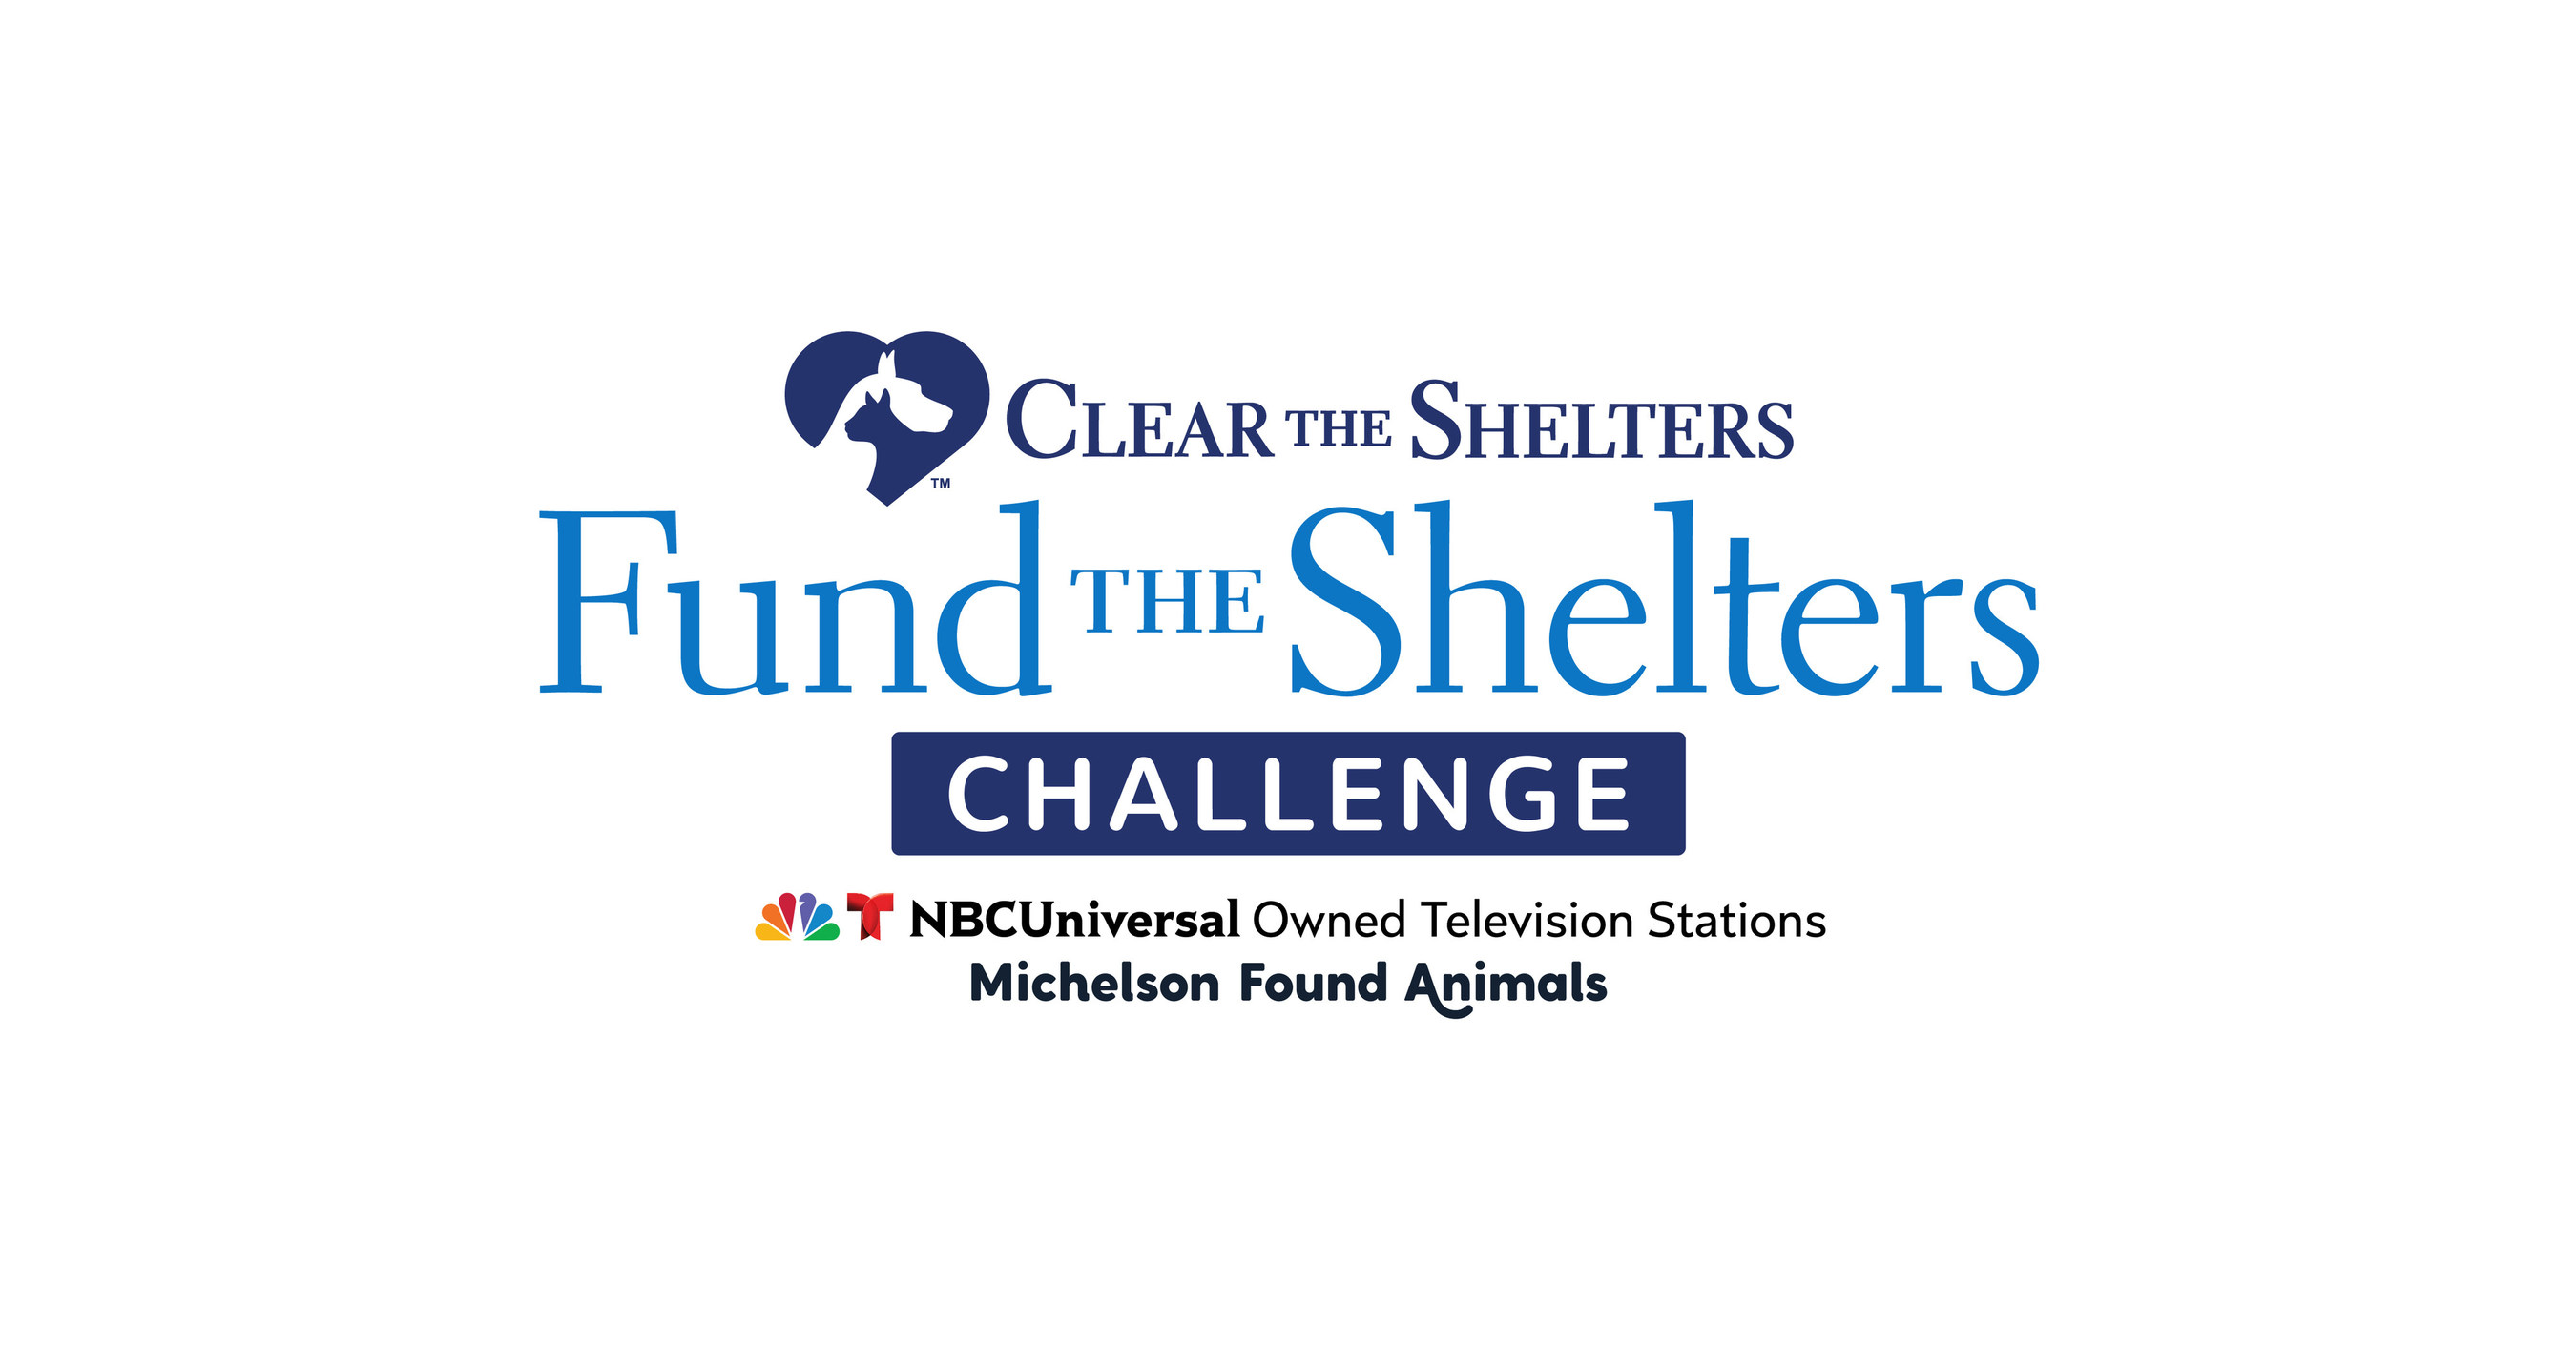 NBC And Telemundo Owned Stations Team Up With The Michelson Found Animals  Foundation To Present The Fund The Shelters Challenge Online Competition